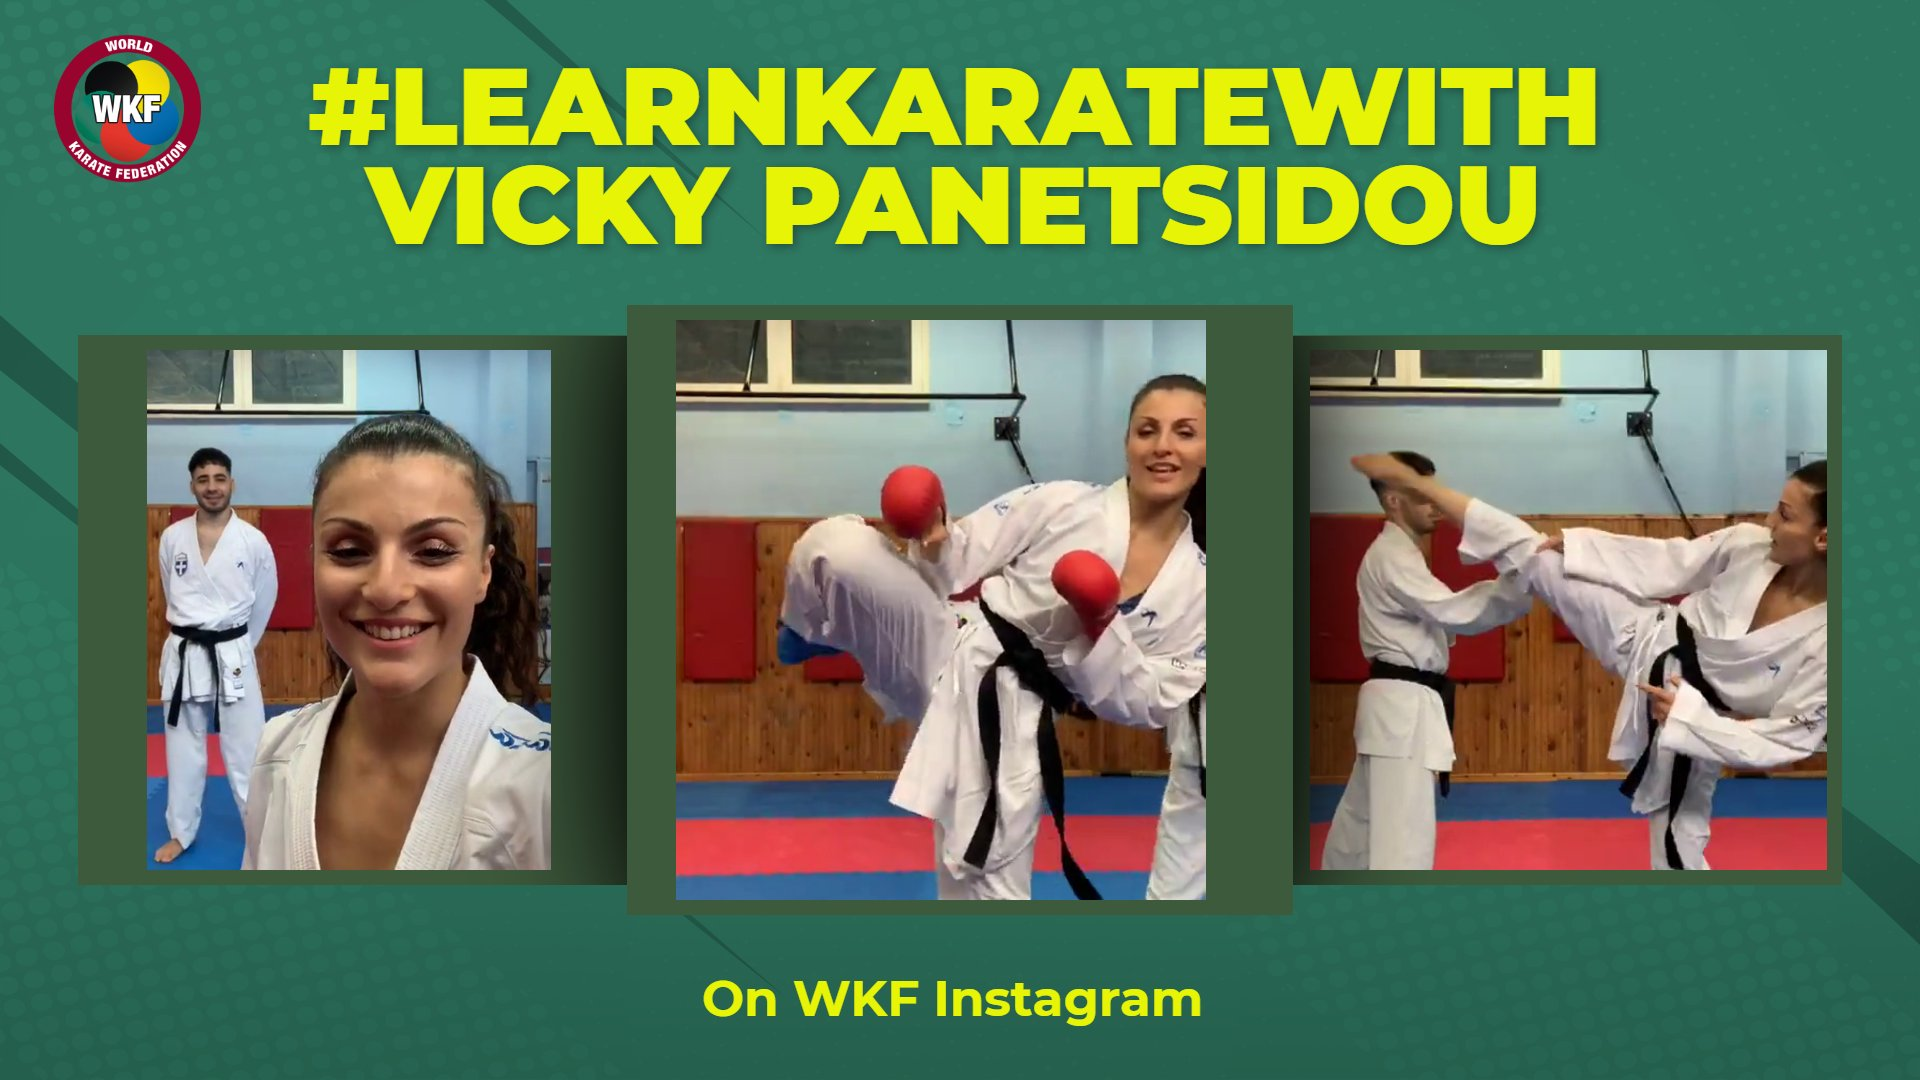 Greek star Panetsidou becomes latest athlete to lead #LearnKarateWith session